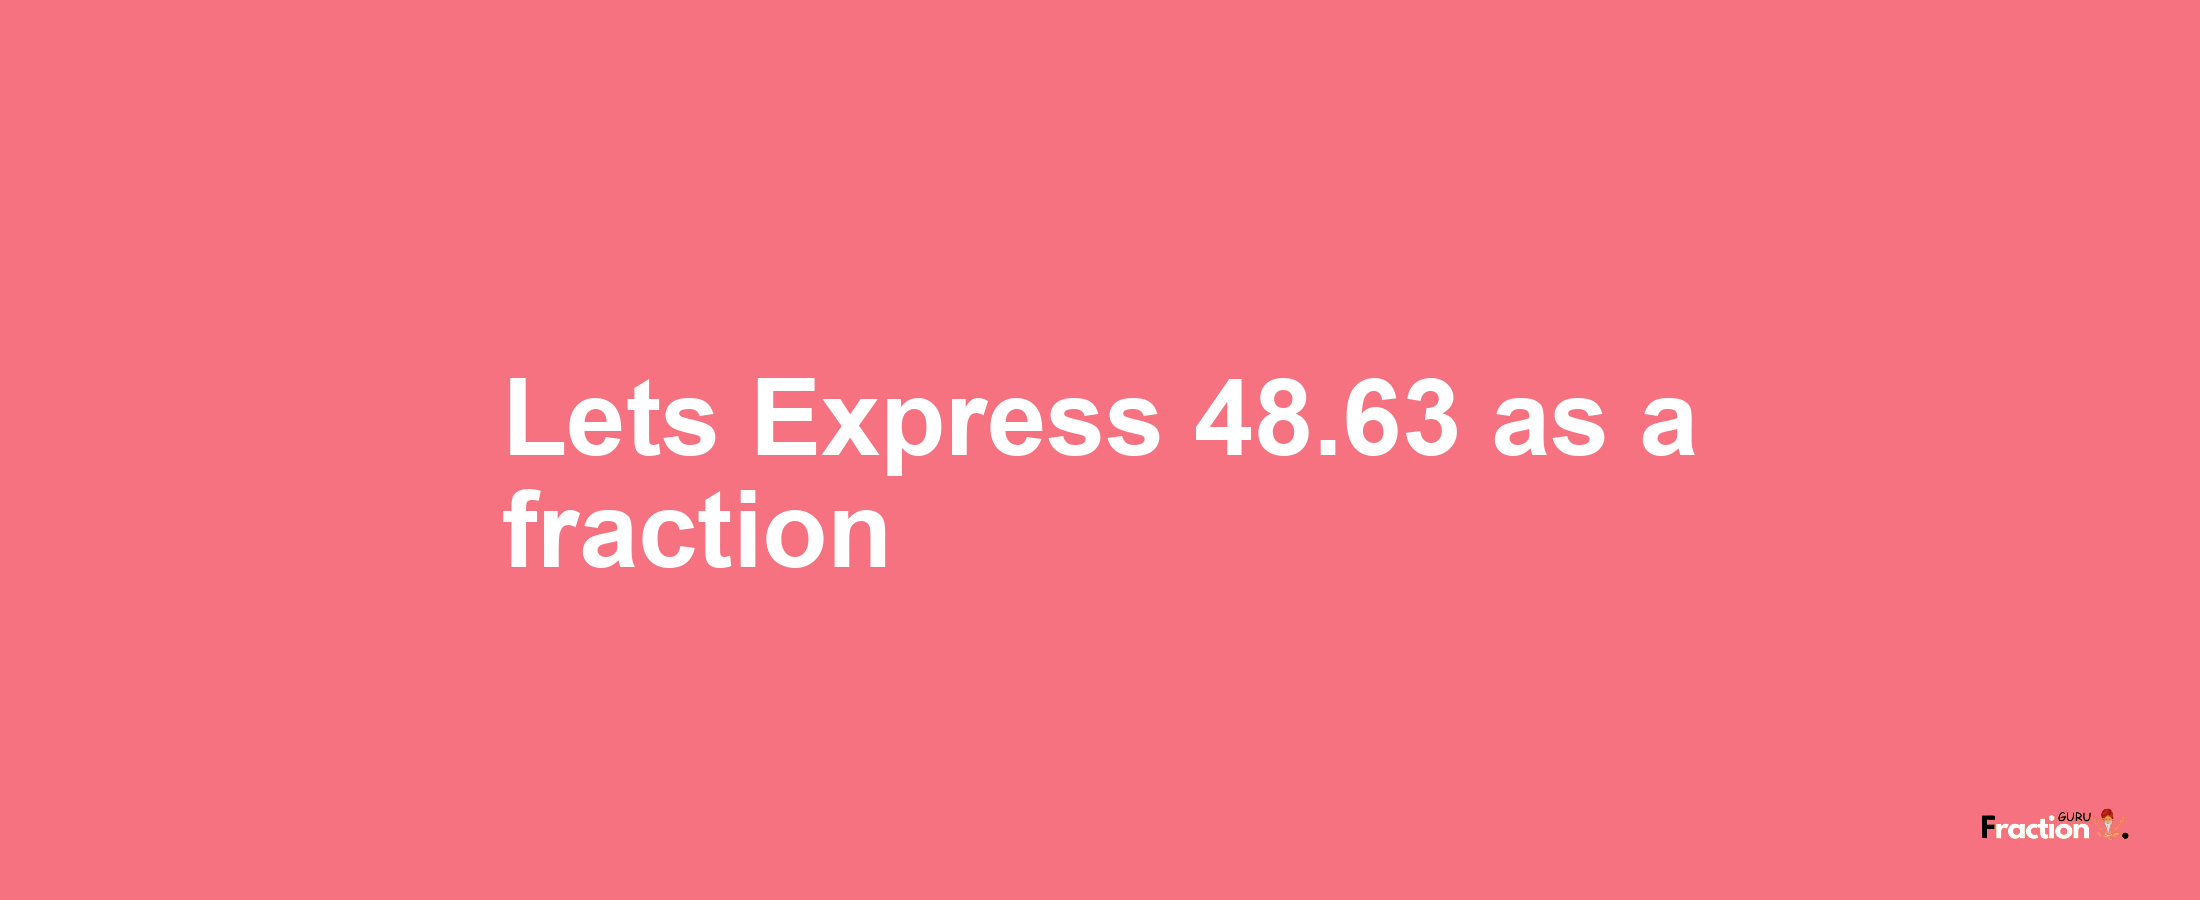 Lets Express 48.63 as afraction